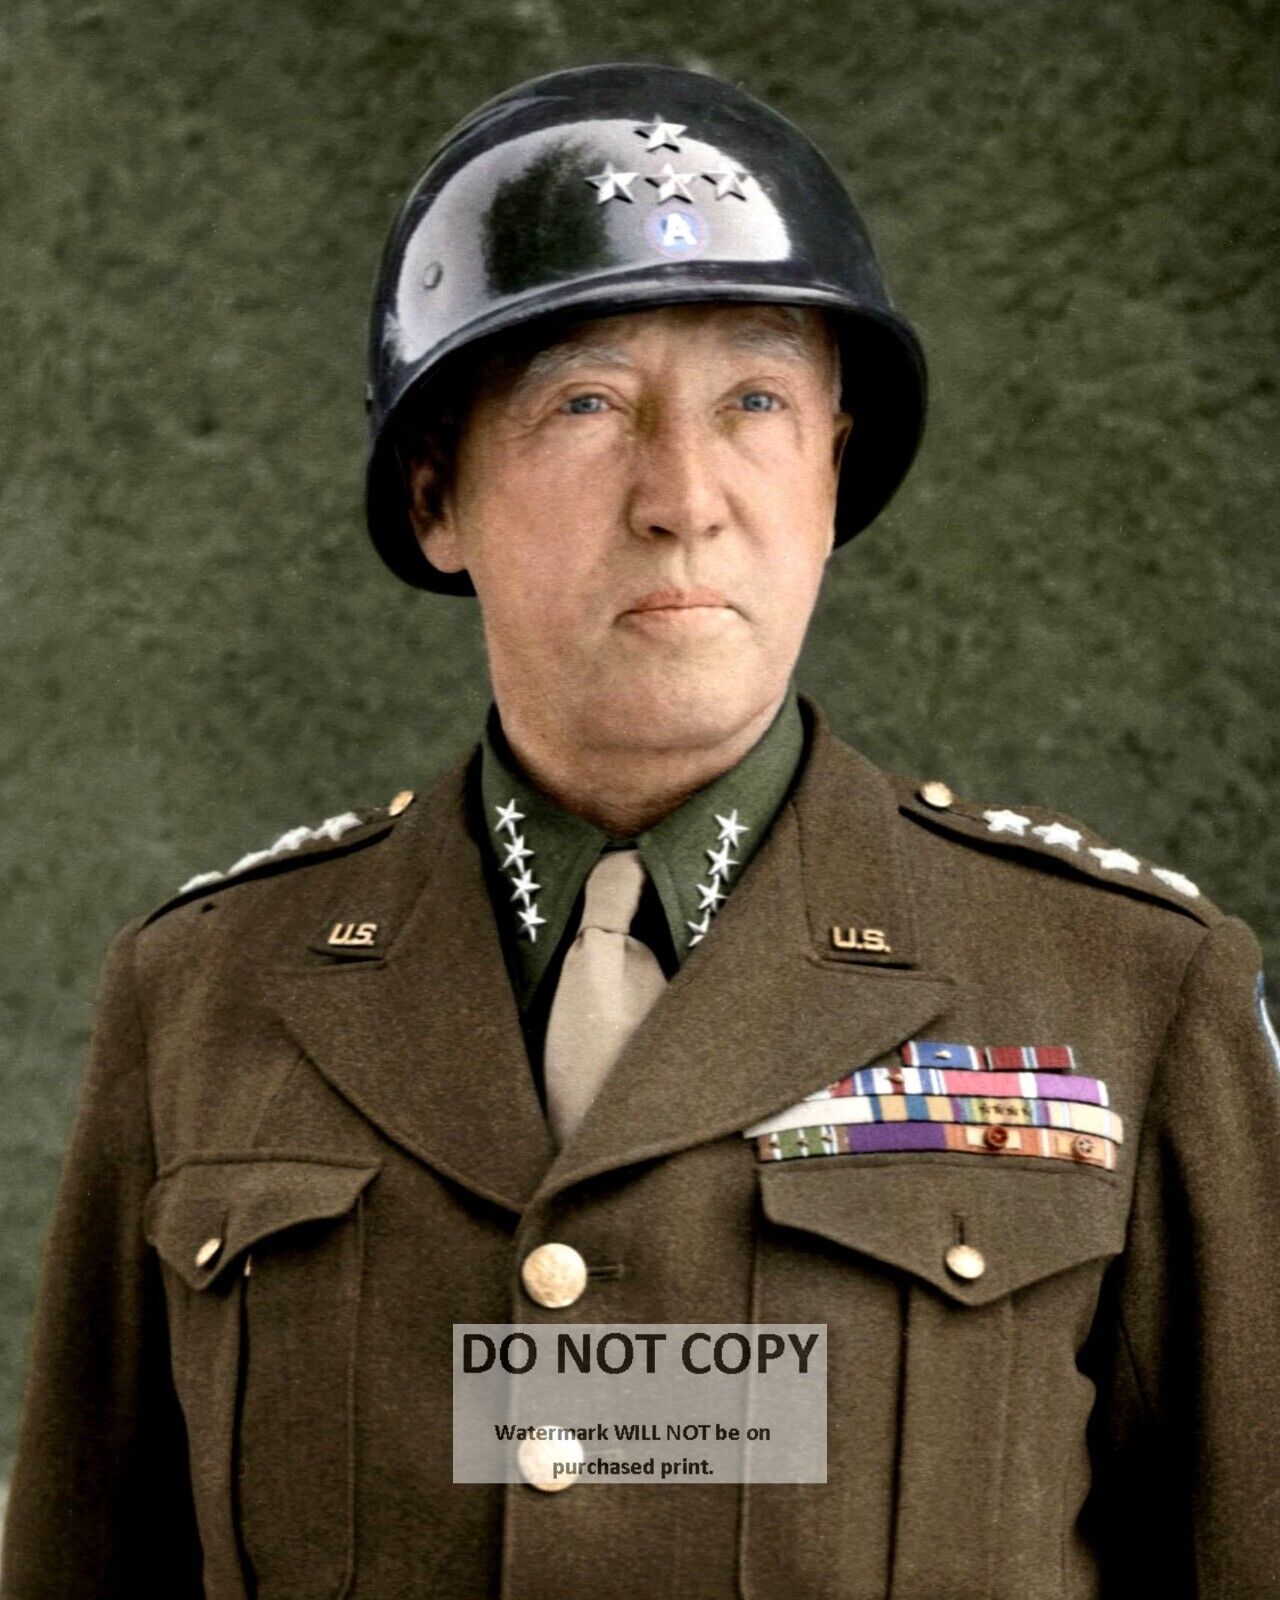 GENERAL GEORGE S. PATTON IN 1945 U.S. ARMY - 8X10 PHOTO (EP-220)